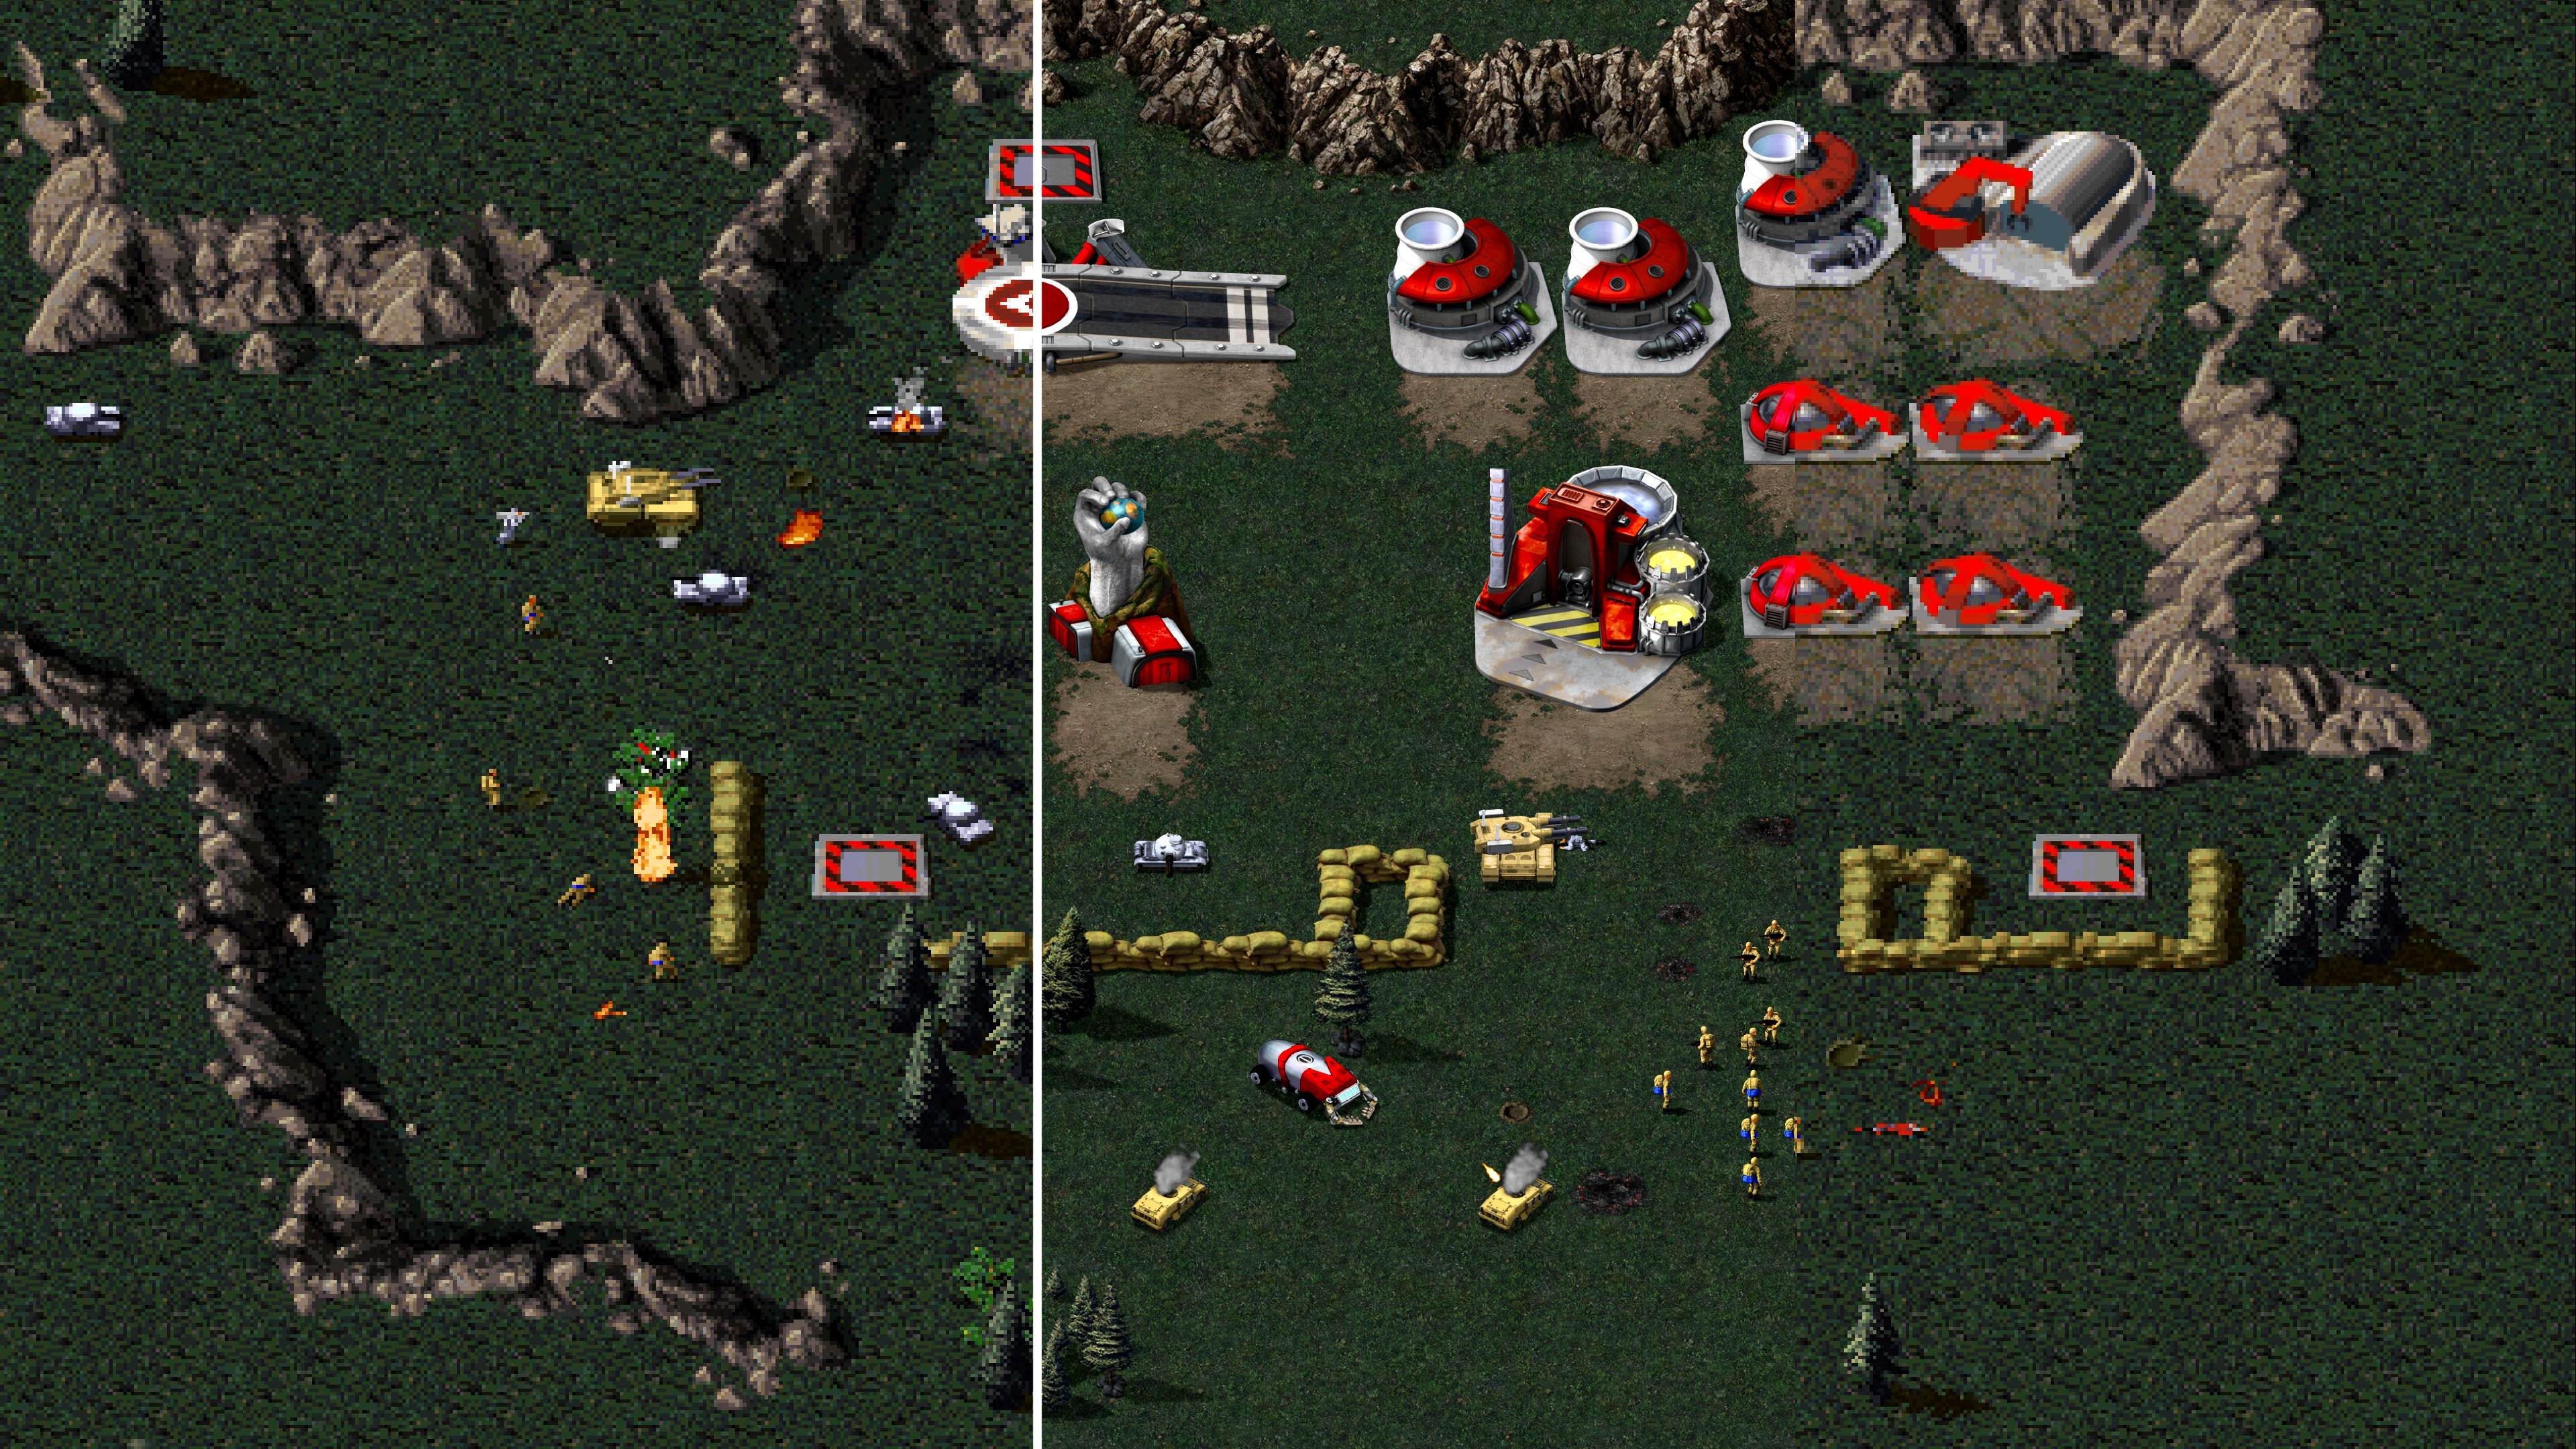 Detail command. Command Conquer Remastered collection 2020. Command and Conquer 1995 Remaster. Command Conquer Tiberian Dawn Remastered. CNC Remastered collection.